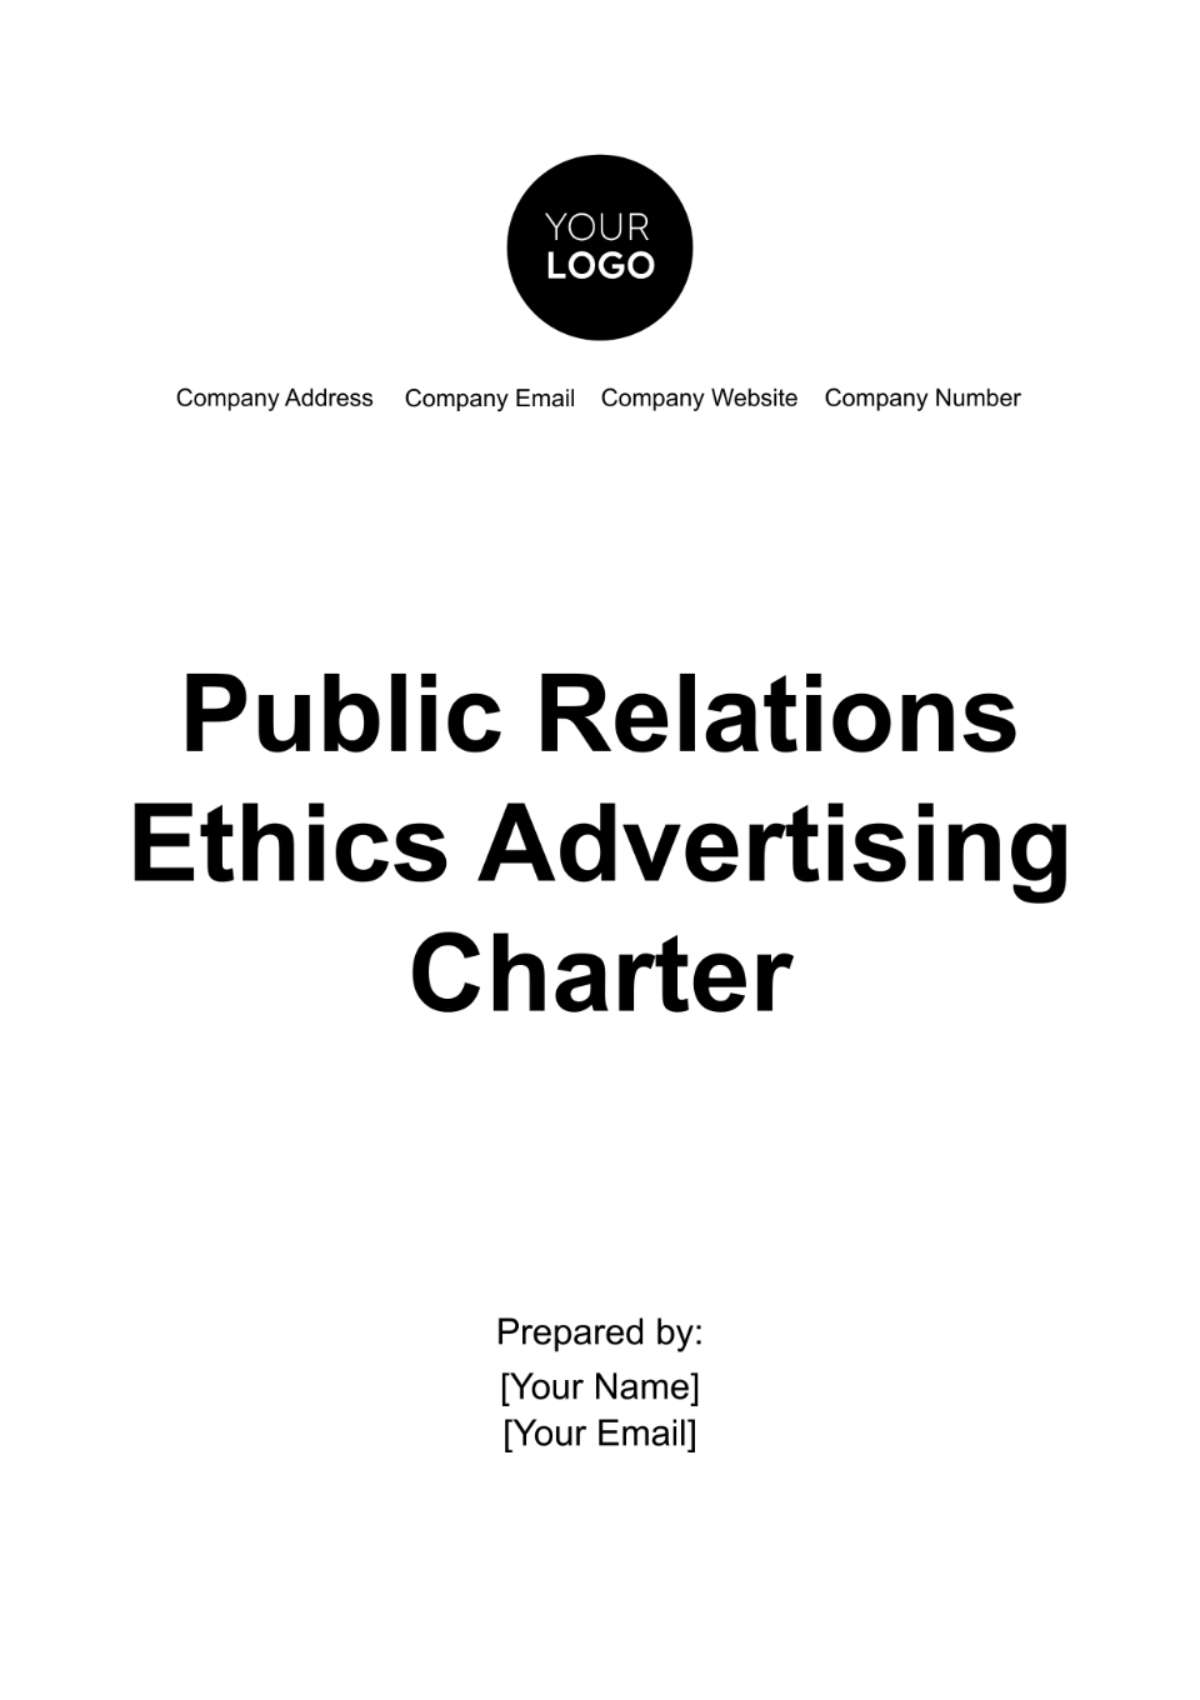 Public Relations Ethics Advertising Charter Template